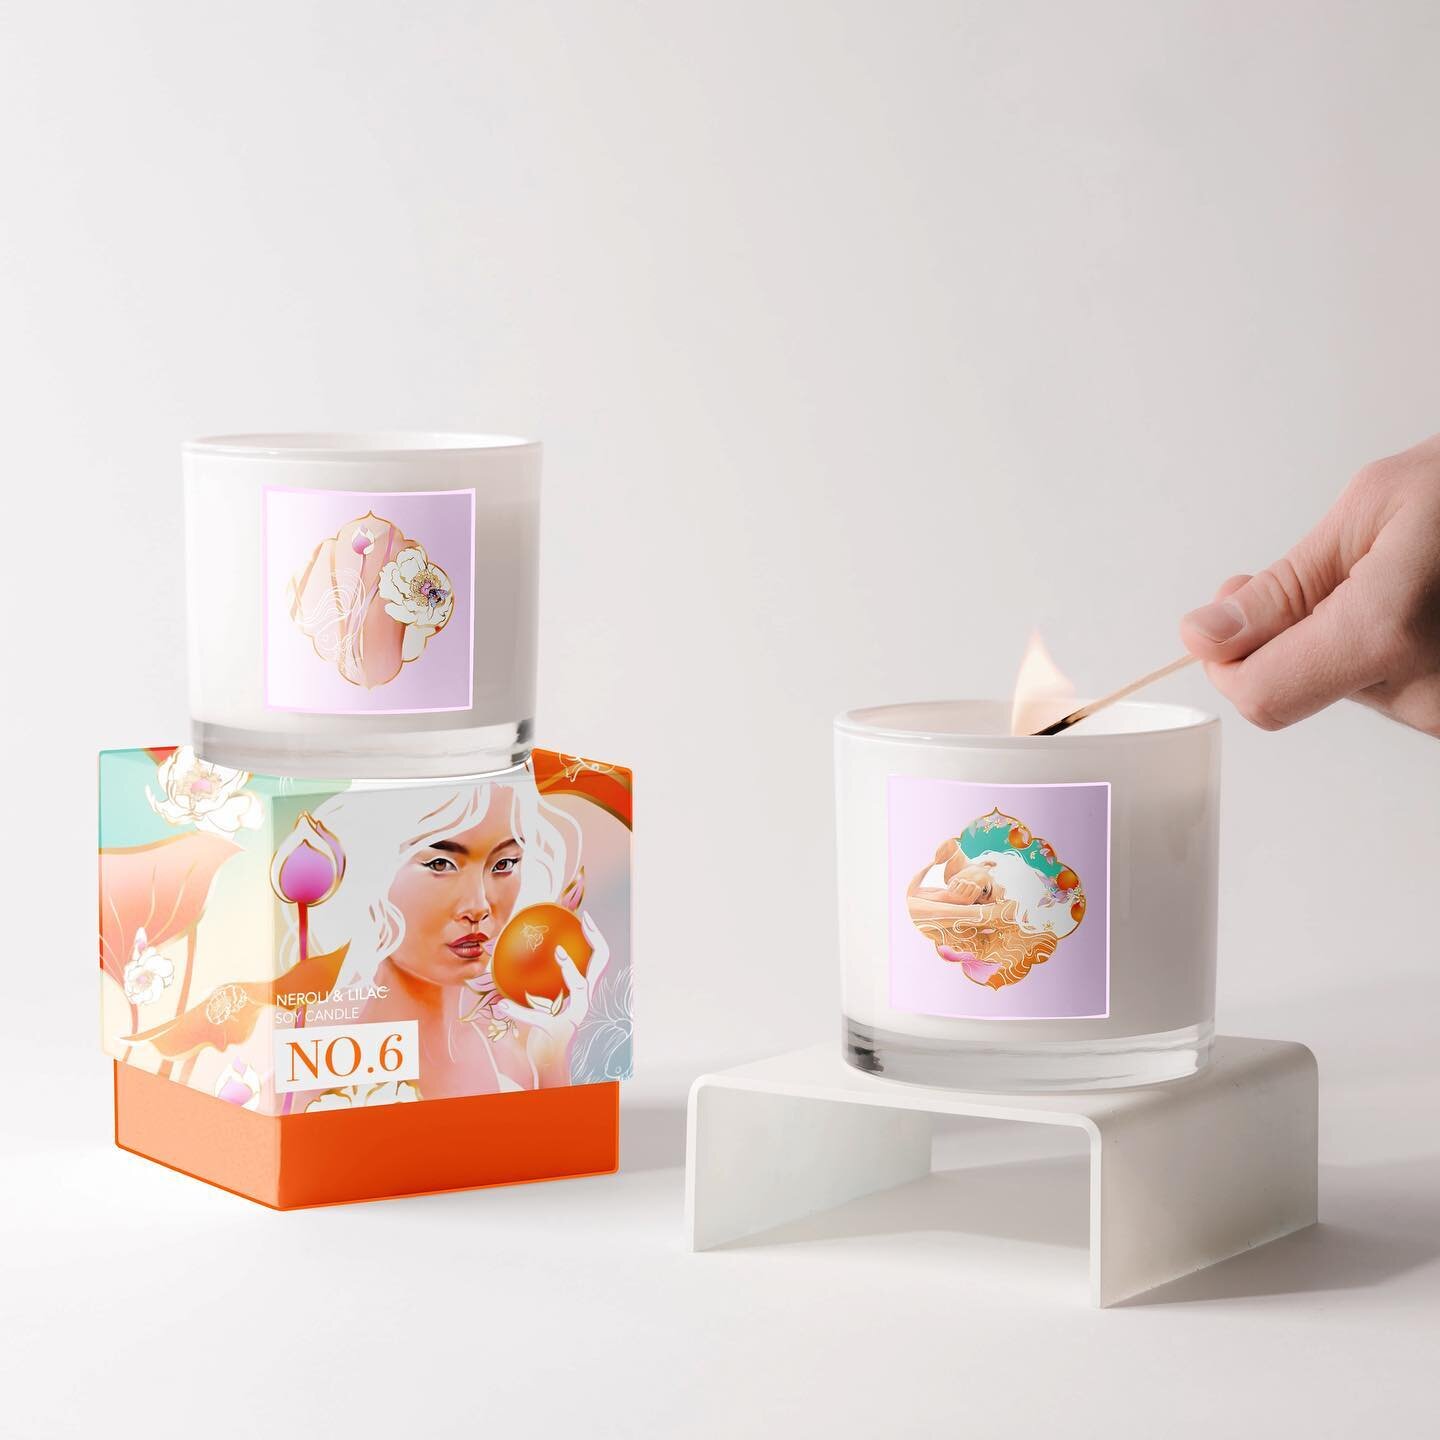 Luxury packaging concepts from my latest &lsquo;Natural Alchemy&rsquo; collection.✨🍊🌸

I always love re-using decorative candles once they&rsquo;ve burnt out, I use the jars for everything from makeup brush holders to vases. What&rsquo;s your favou